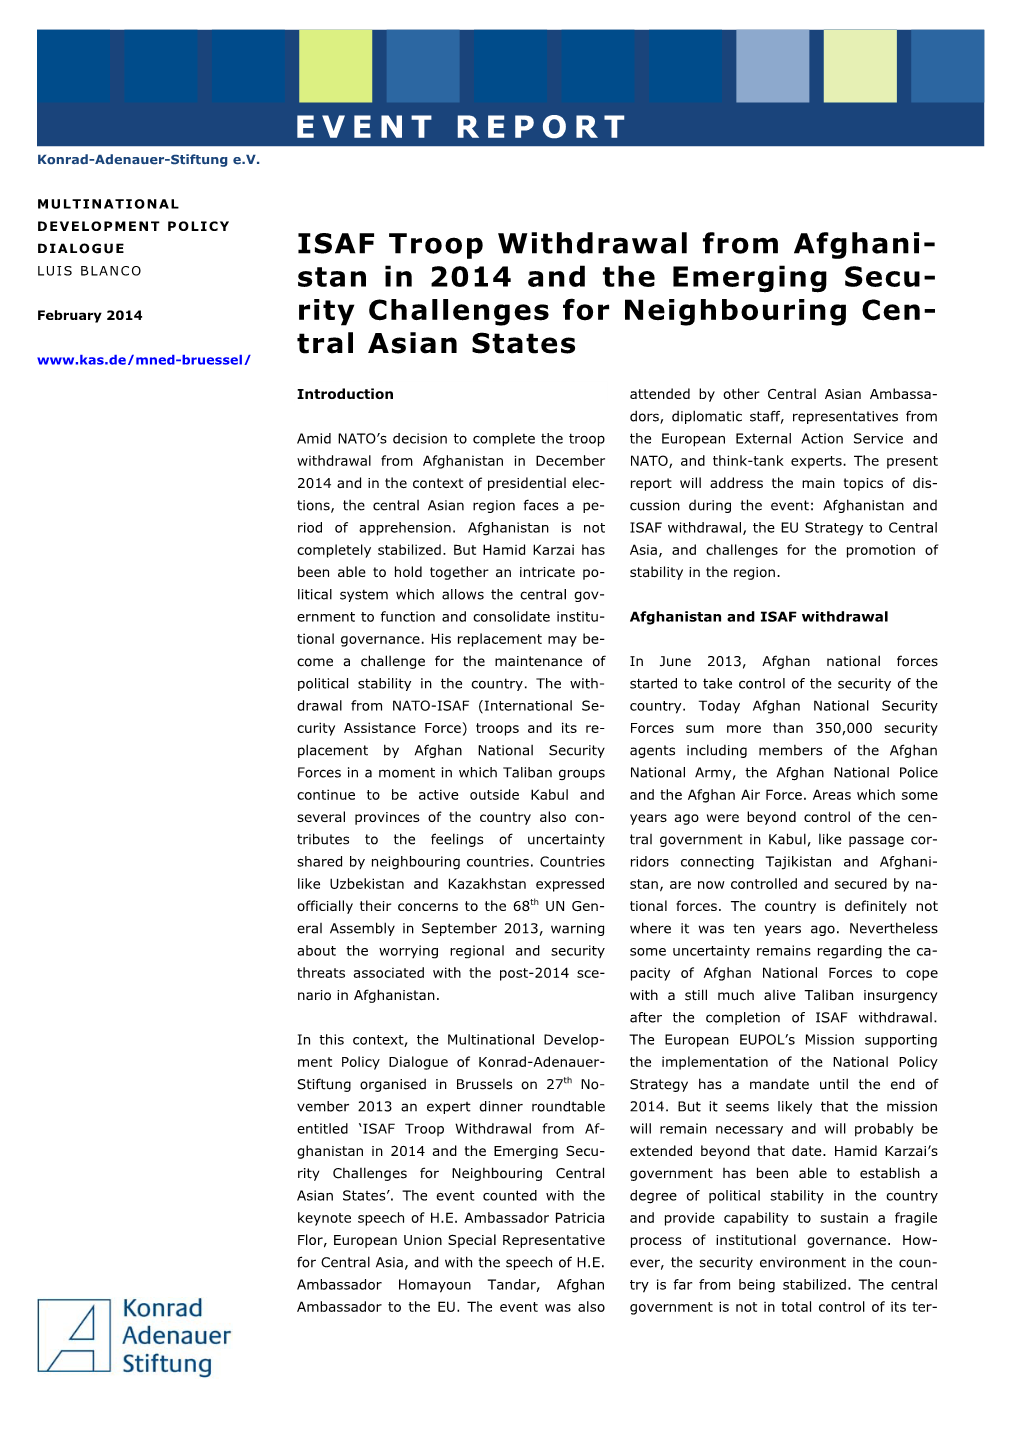 EVENT REPORT ISAF Troop Withdrawal from Afghani